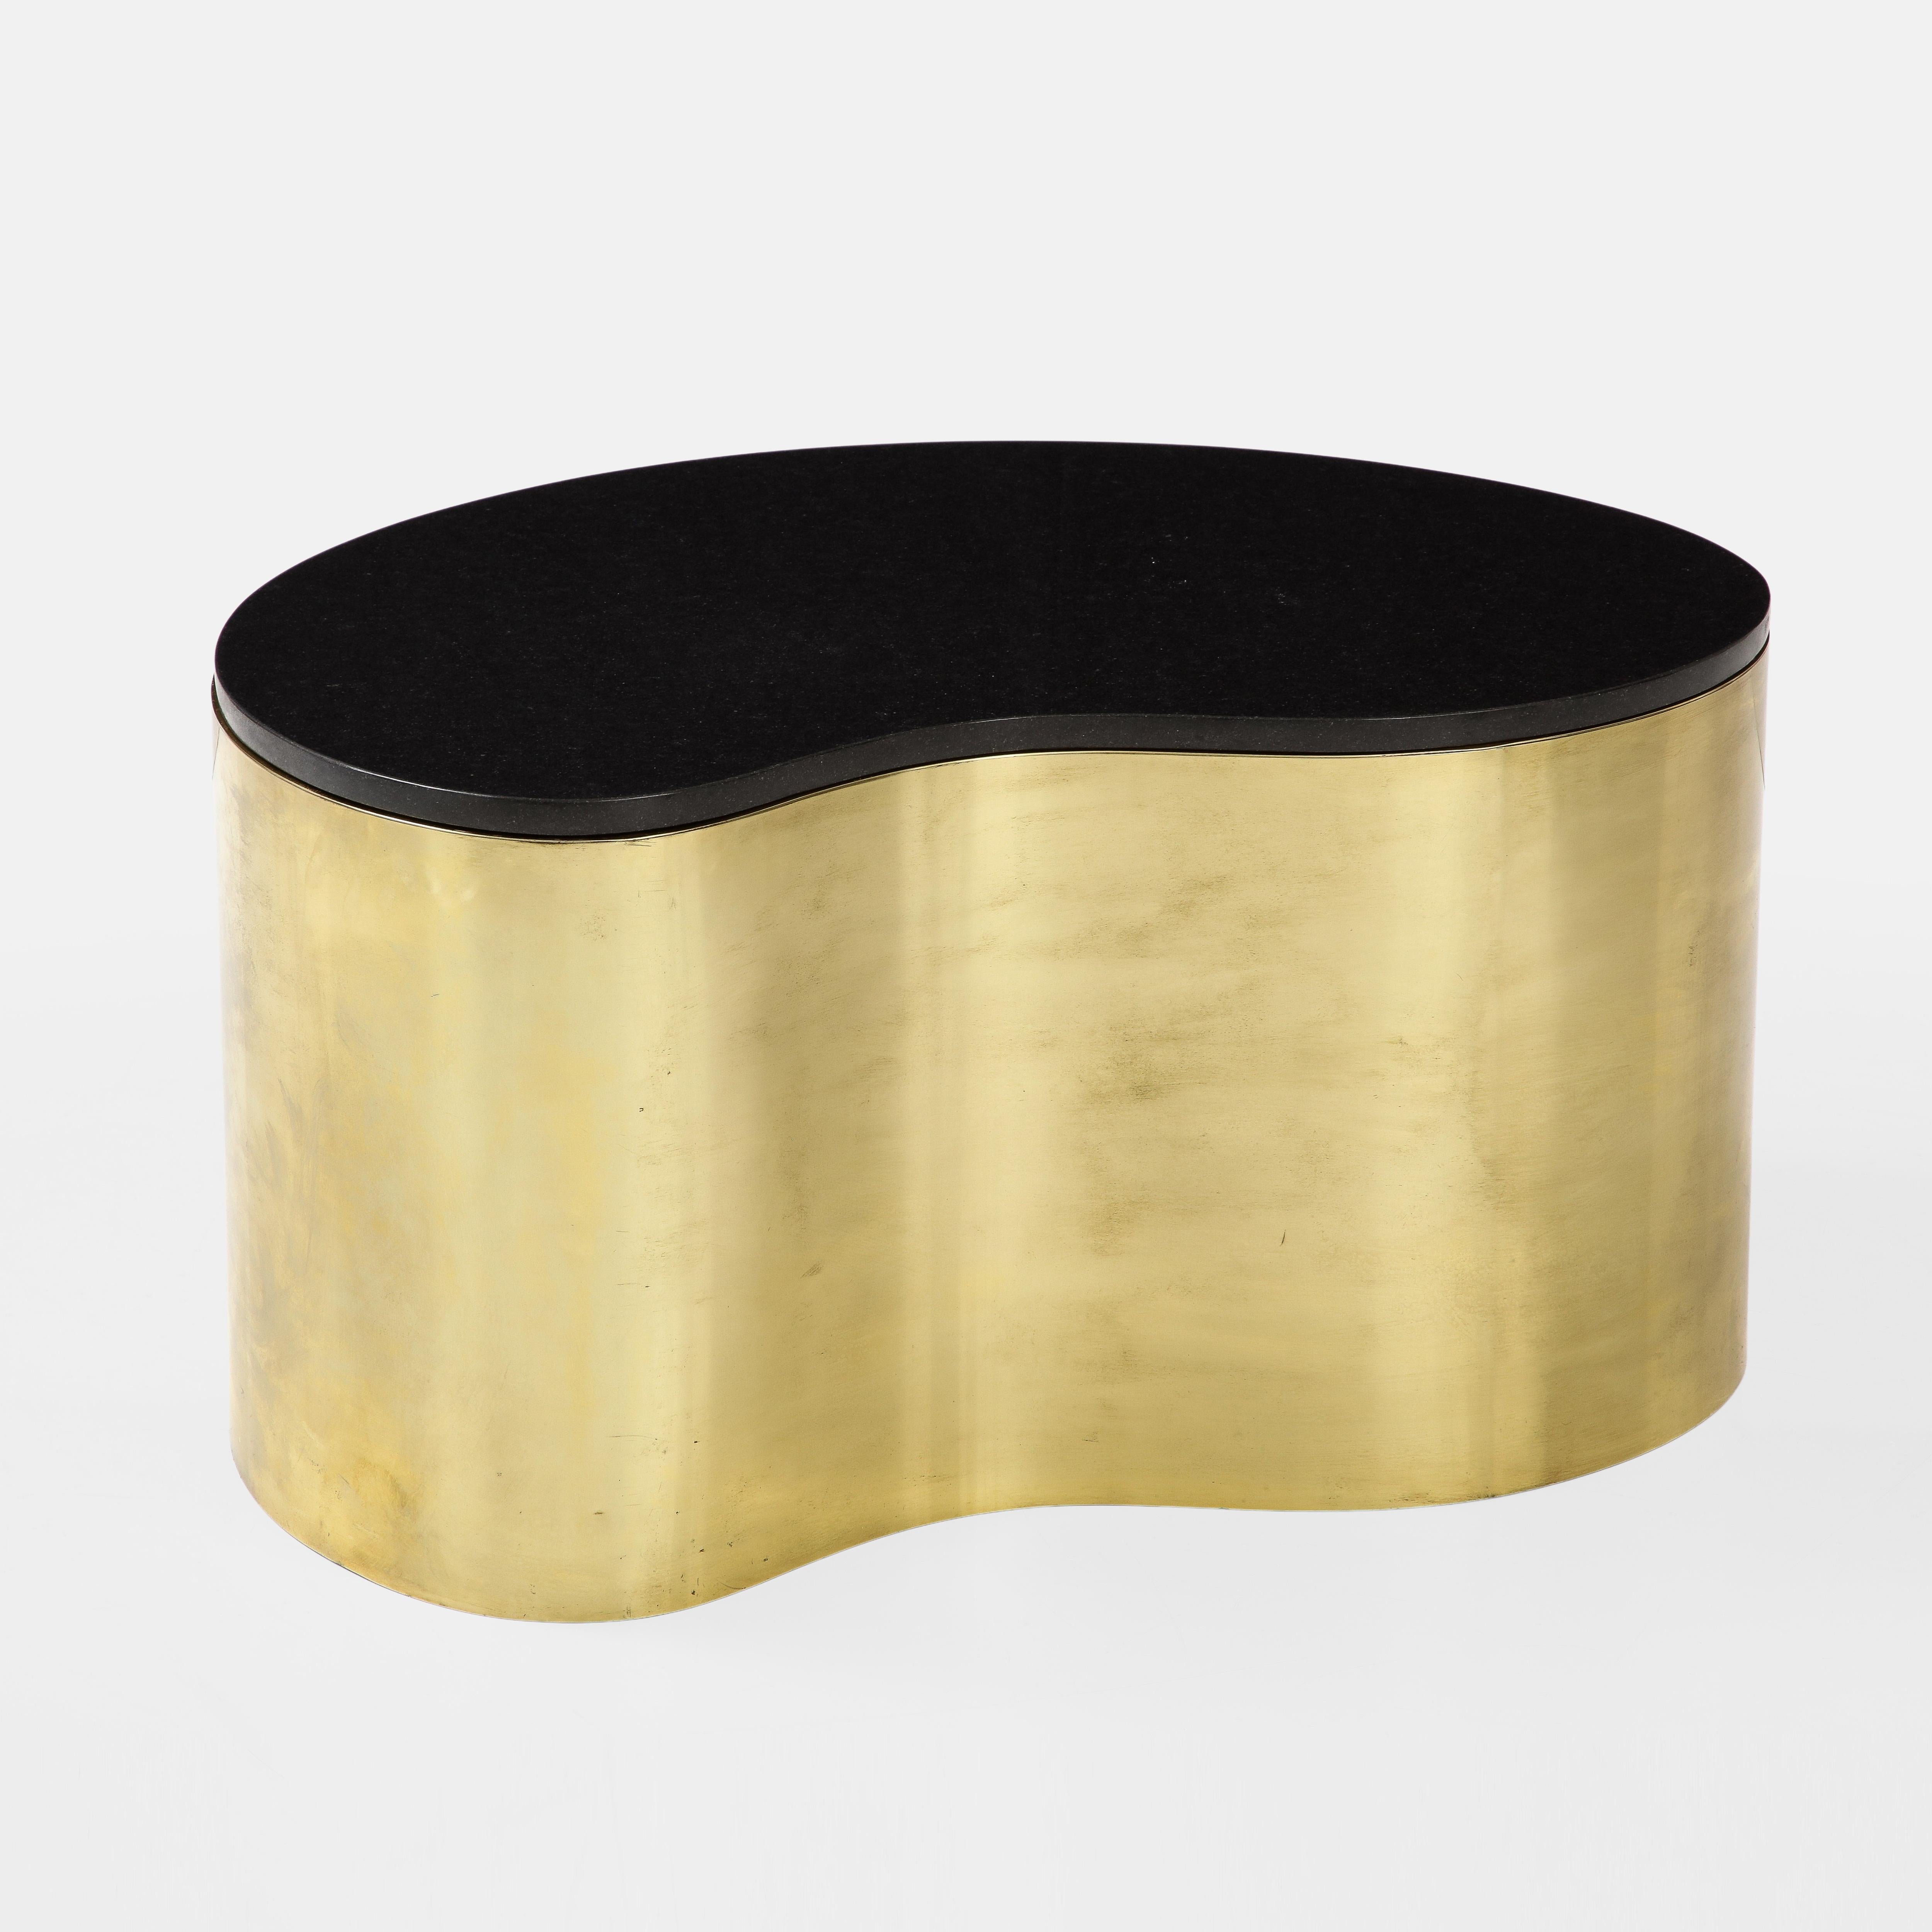 Karl Springer Freeform Coffee Table in Brass and Black Granite Top, 1970s For Sale 3